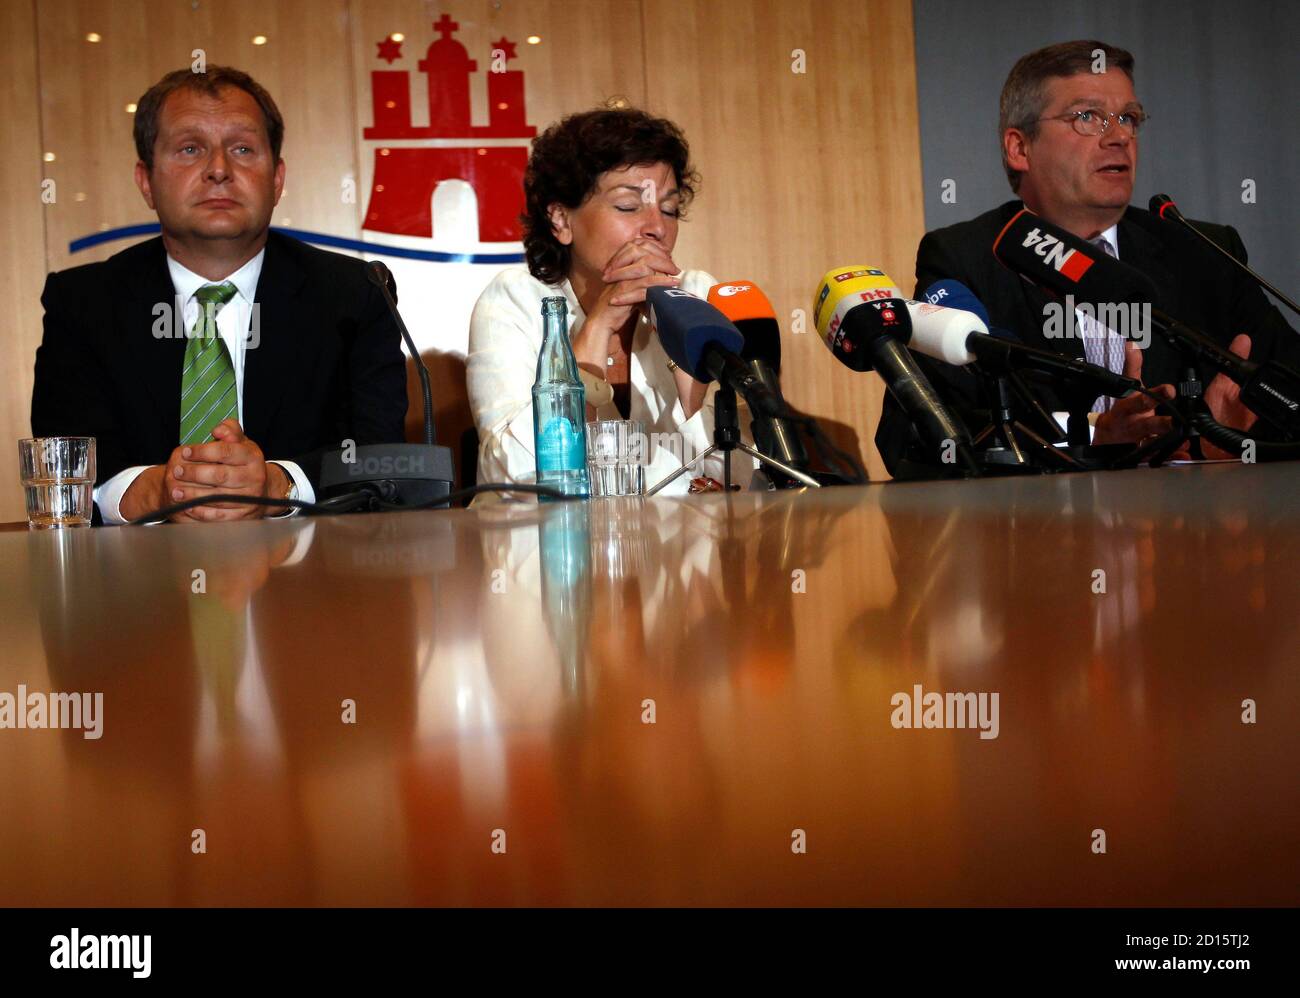 (L-R) Greens fraction leader Jens Kerstan, Christa Goetsch, Hamburg's second mayor and senator for school and education of the environmental German Green party (Buendnis 90, Die Gruenen) and CDU fraction leader Frank Schira attend a news conference at the town hall in Hamburg July 19, 2010.   REUTERS/Christian Charisius (GERMANY) Stock Photo